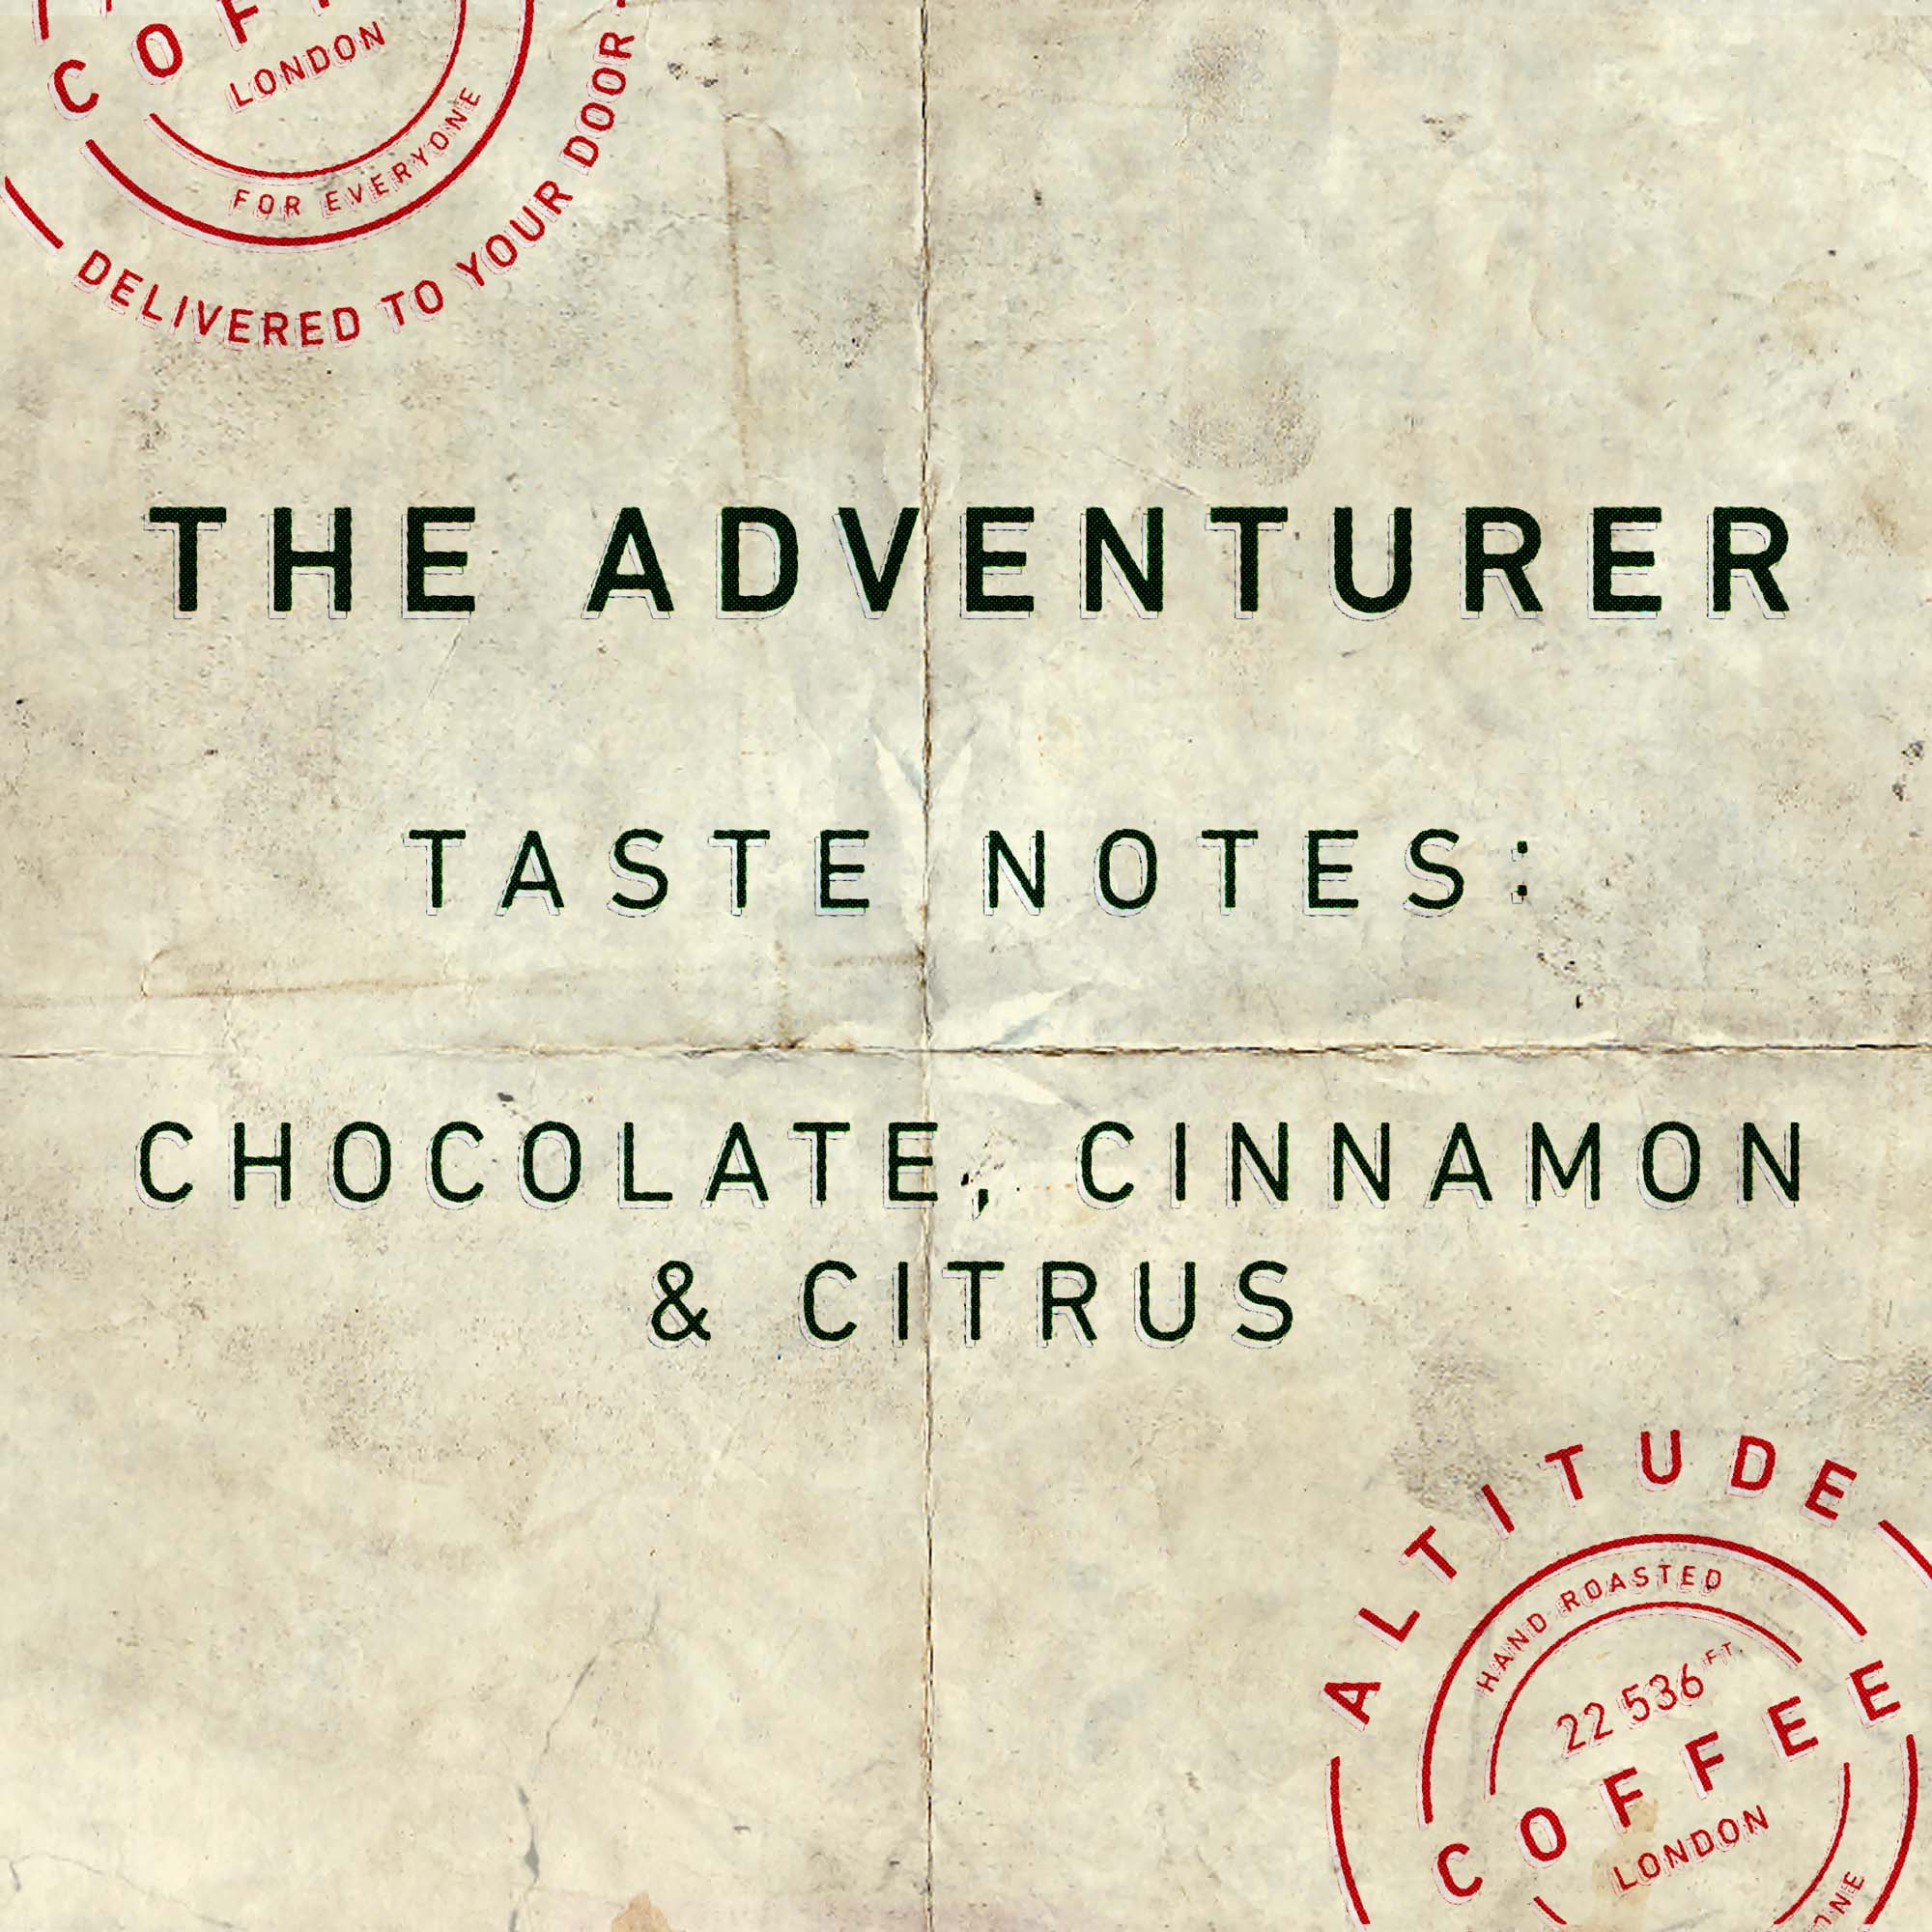 The Adventurer specialty coffee blend